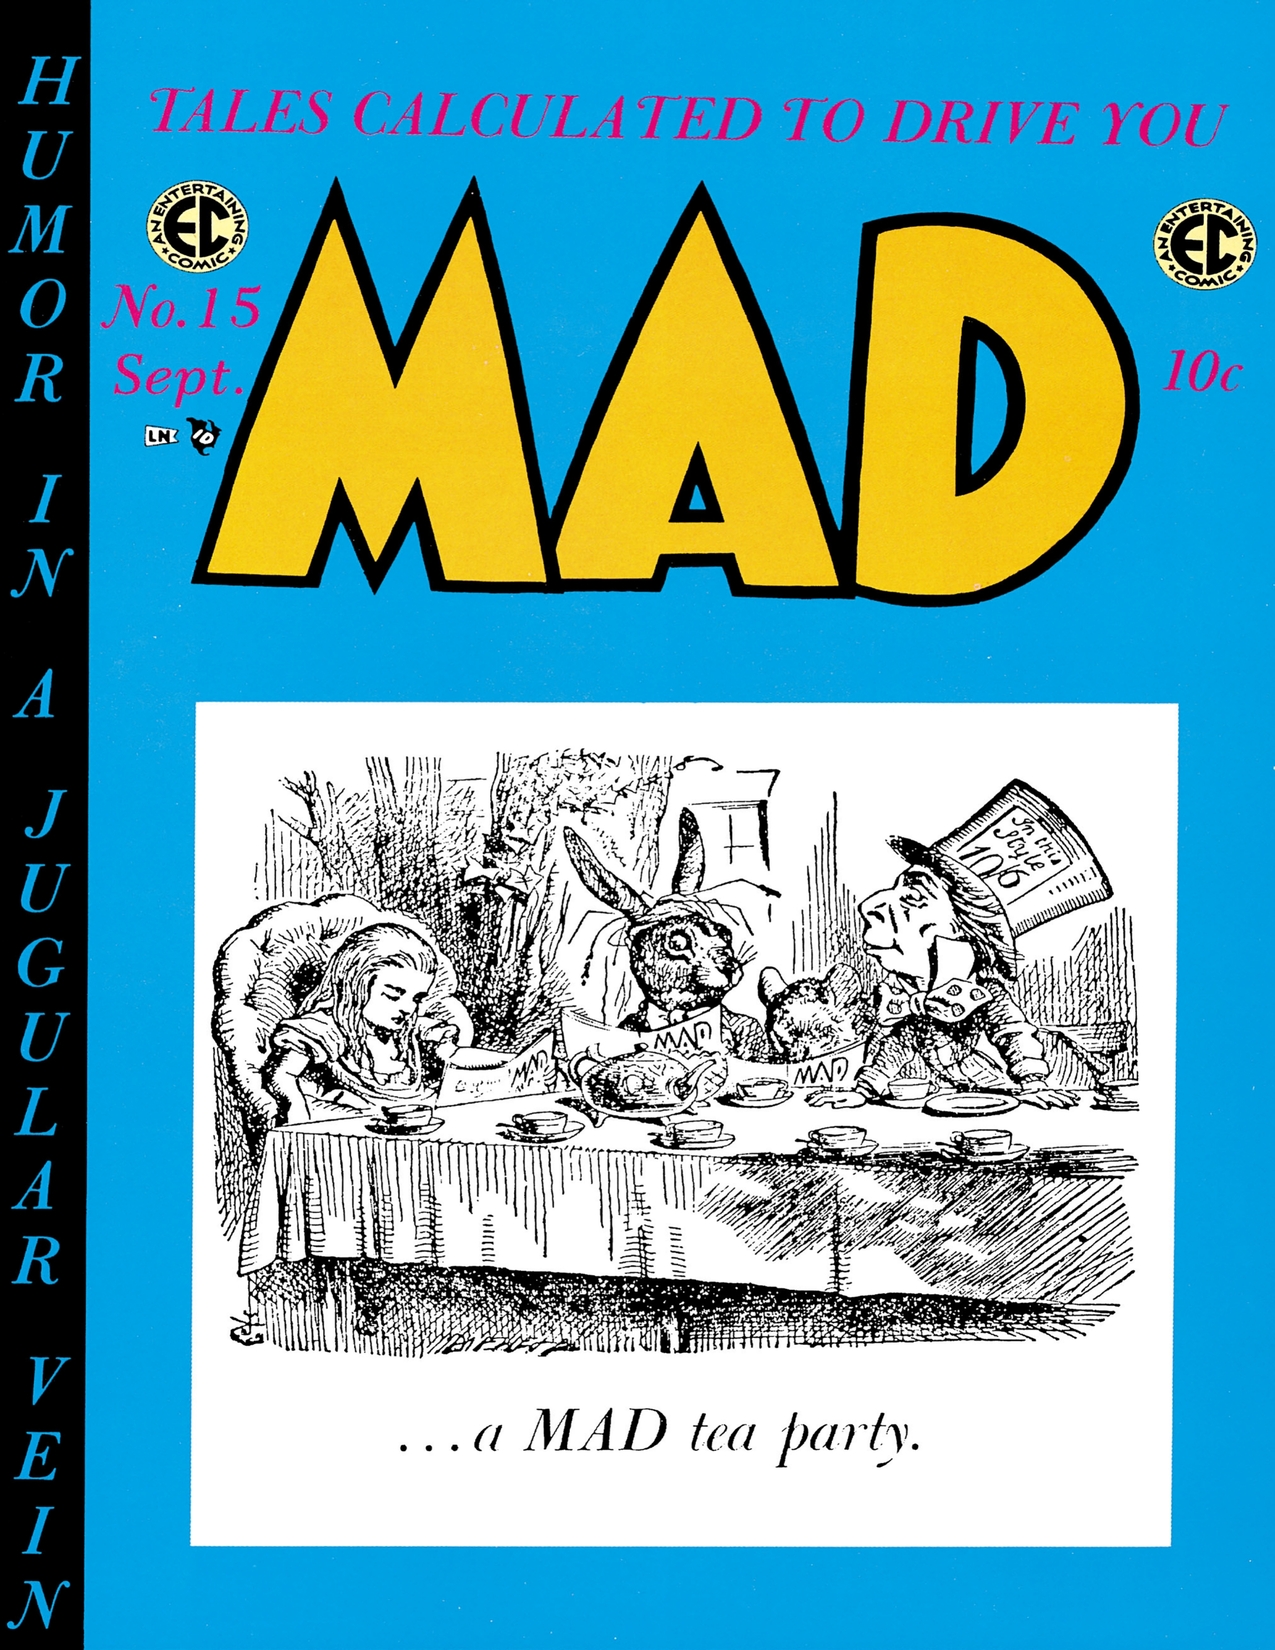 MAD Magazine #15 preview images